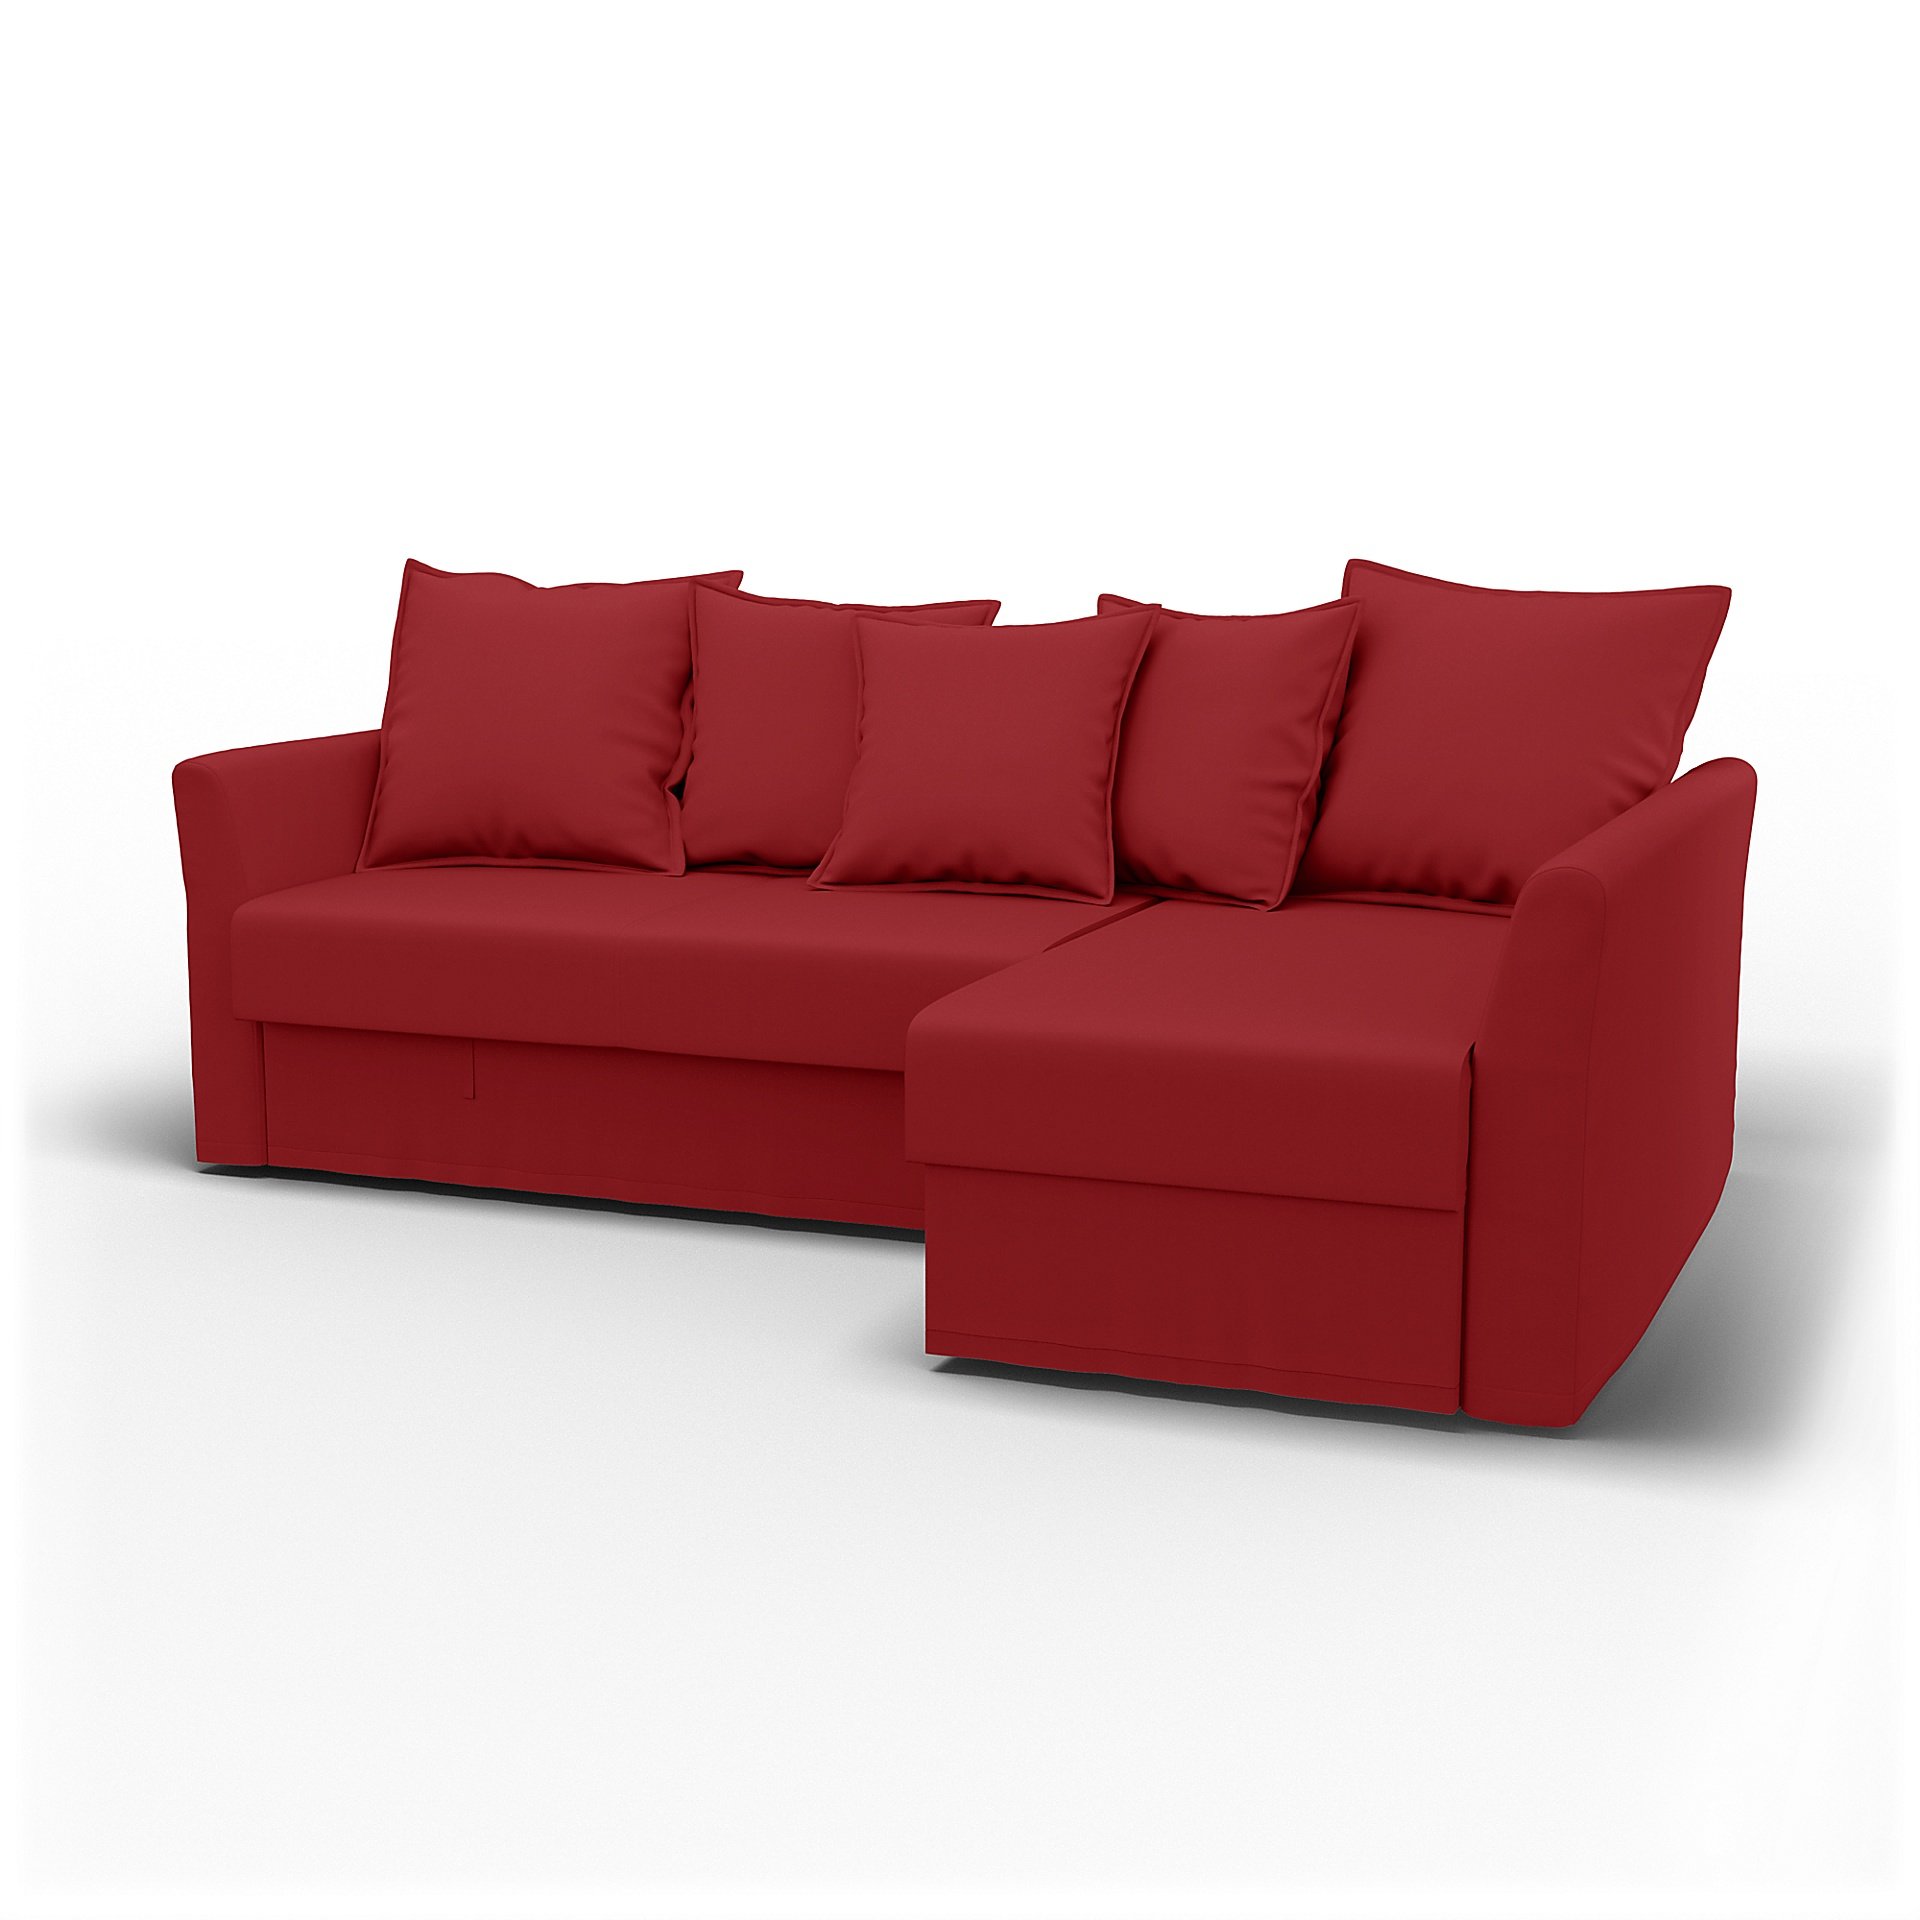 IKEA - Holmsund Sofabed with Chaiselongue, Scarlet Red, Cotton - Bemz